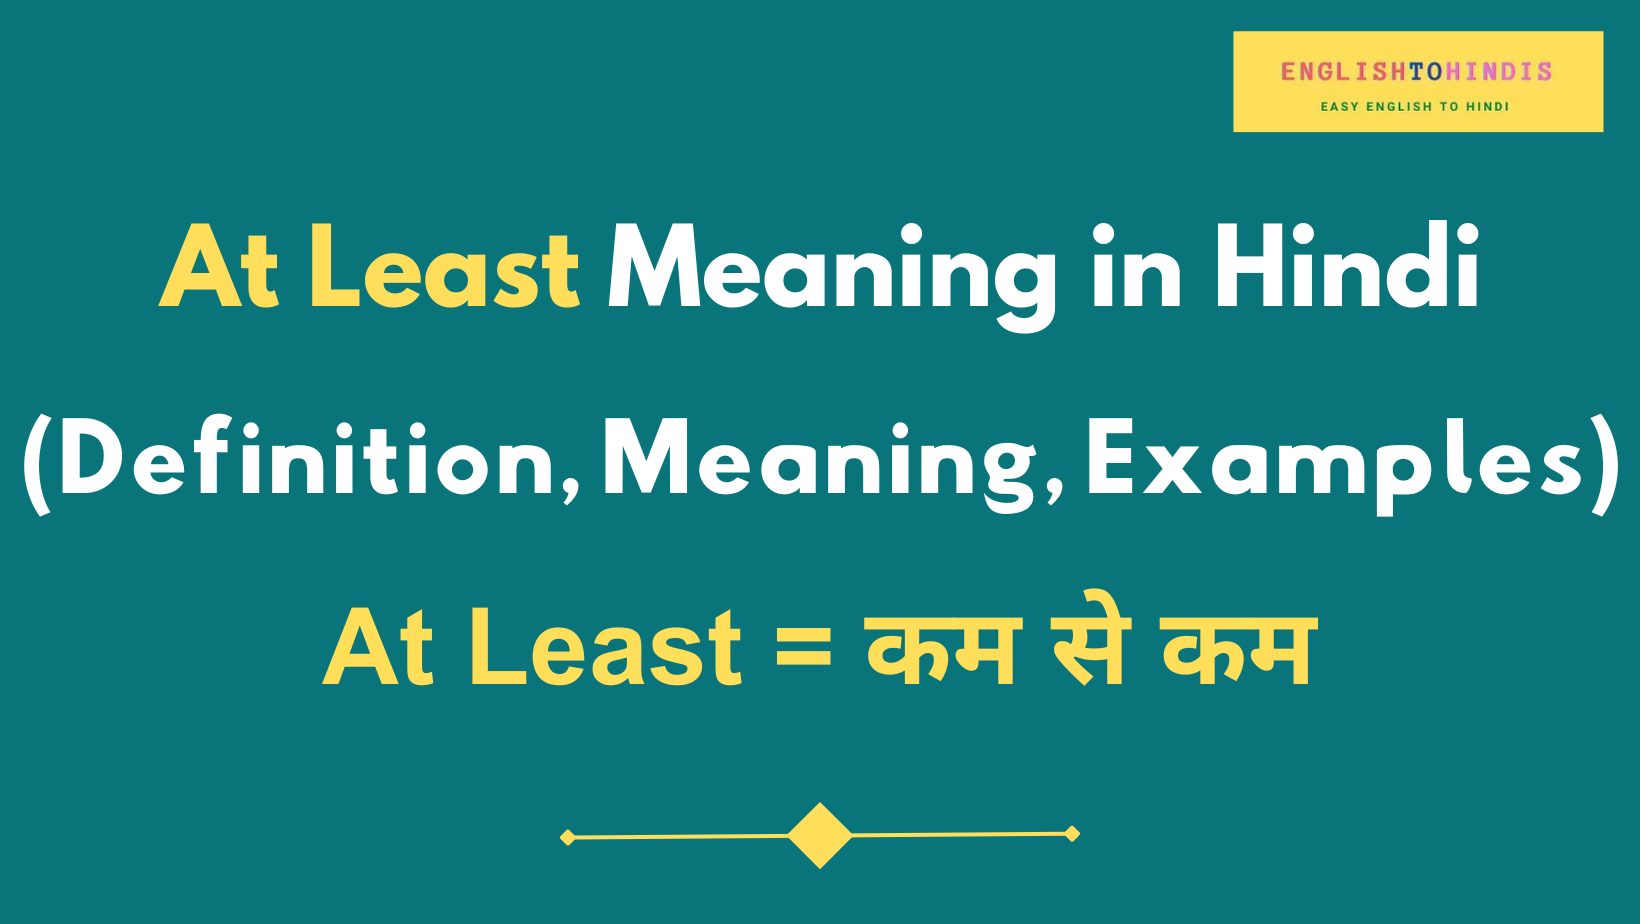 At Least Meaning in Hindi